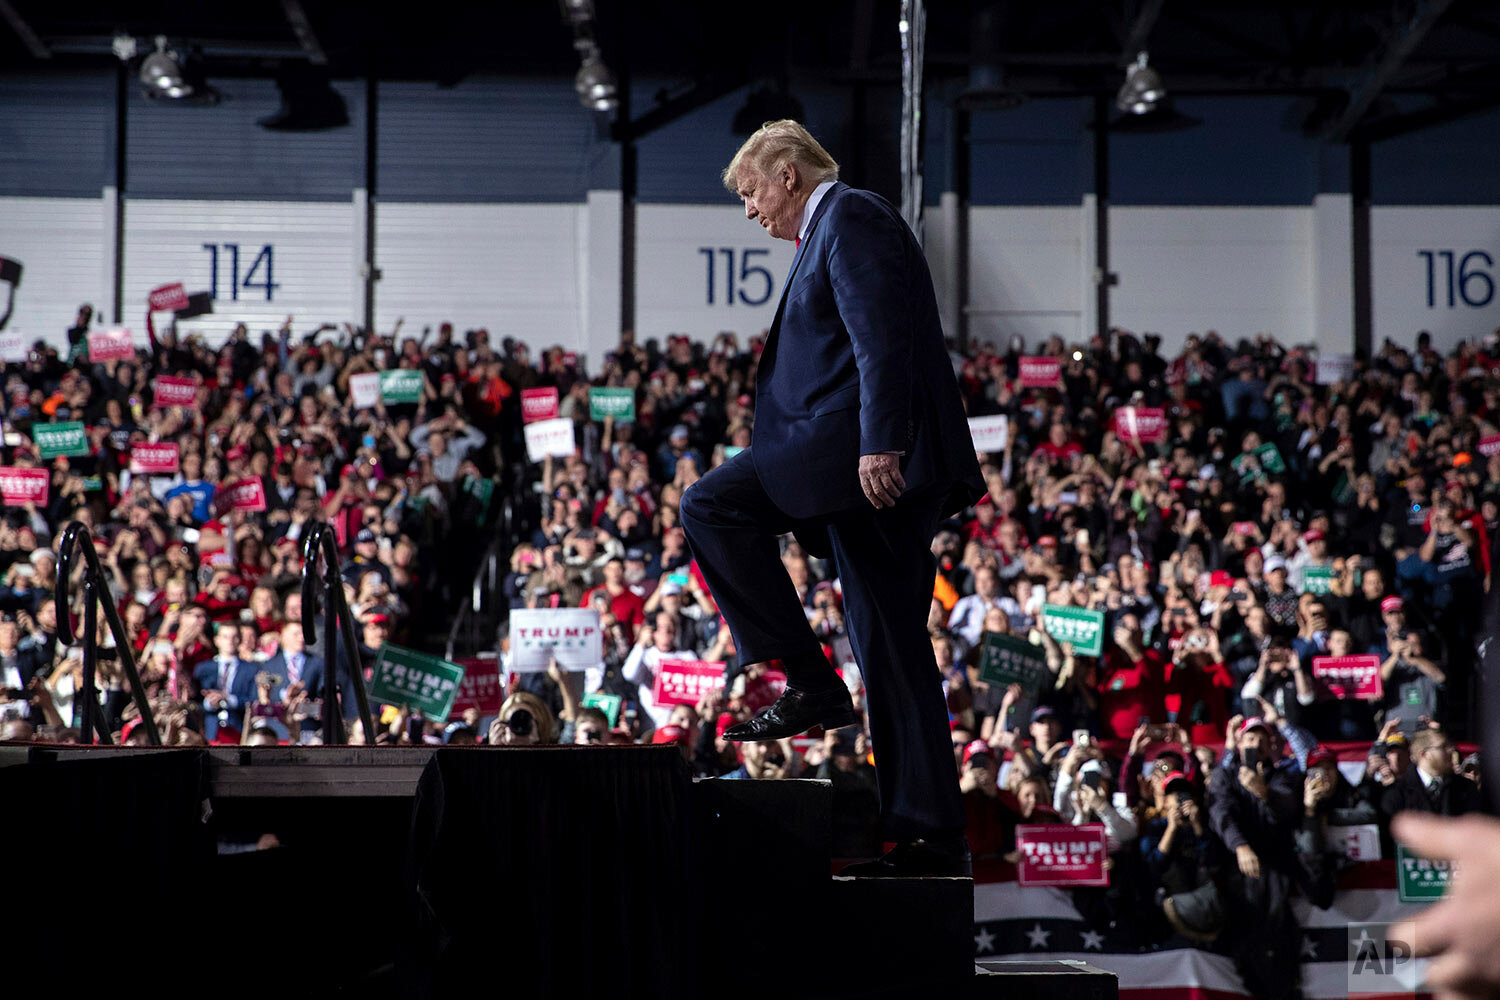  President Donald Trump arrives at W.K. Kellogg Airport to attend a campaign rally, Wednesday, Dec. 18, 2019, in Battle Creek, Mich., on the same day the House of Representatives voted to impeach him. (AP Photo/ Evan Vucci) 